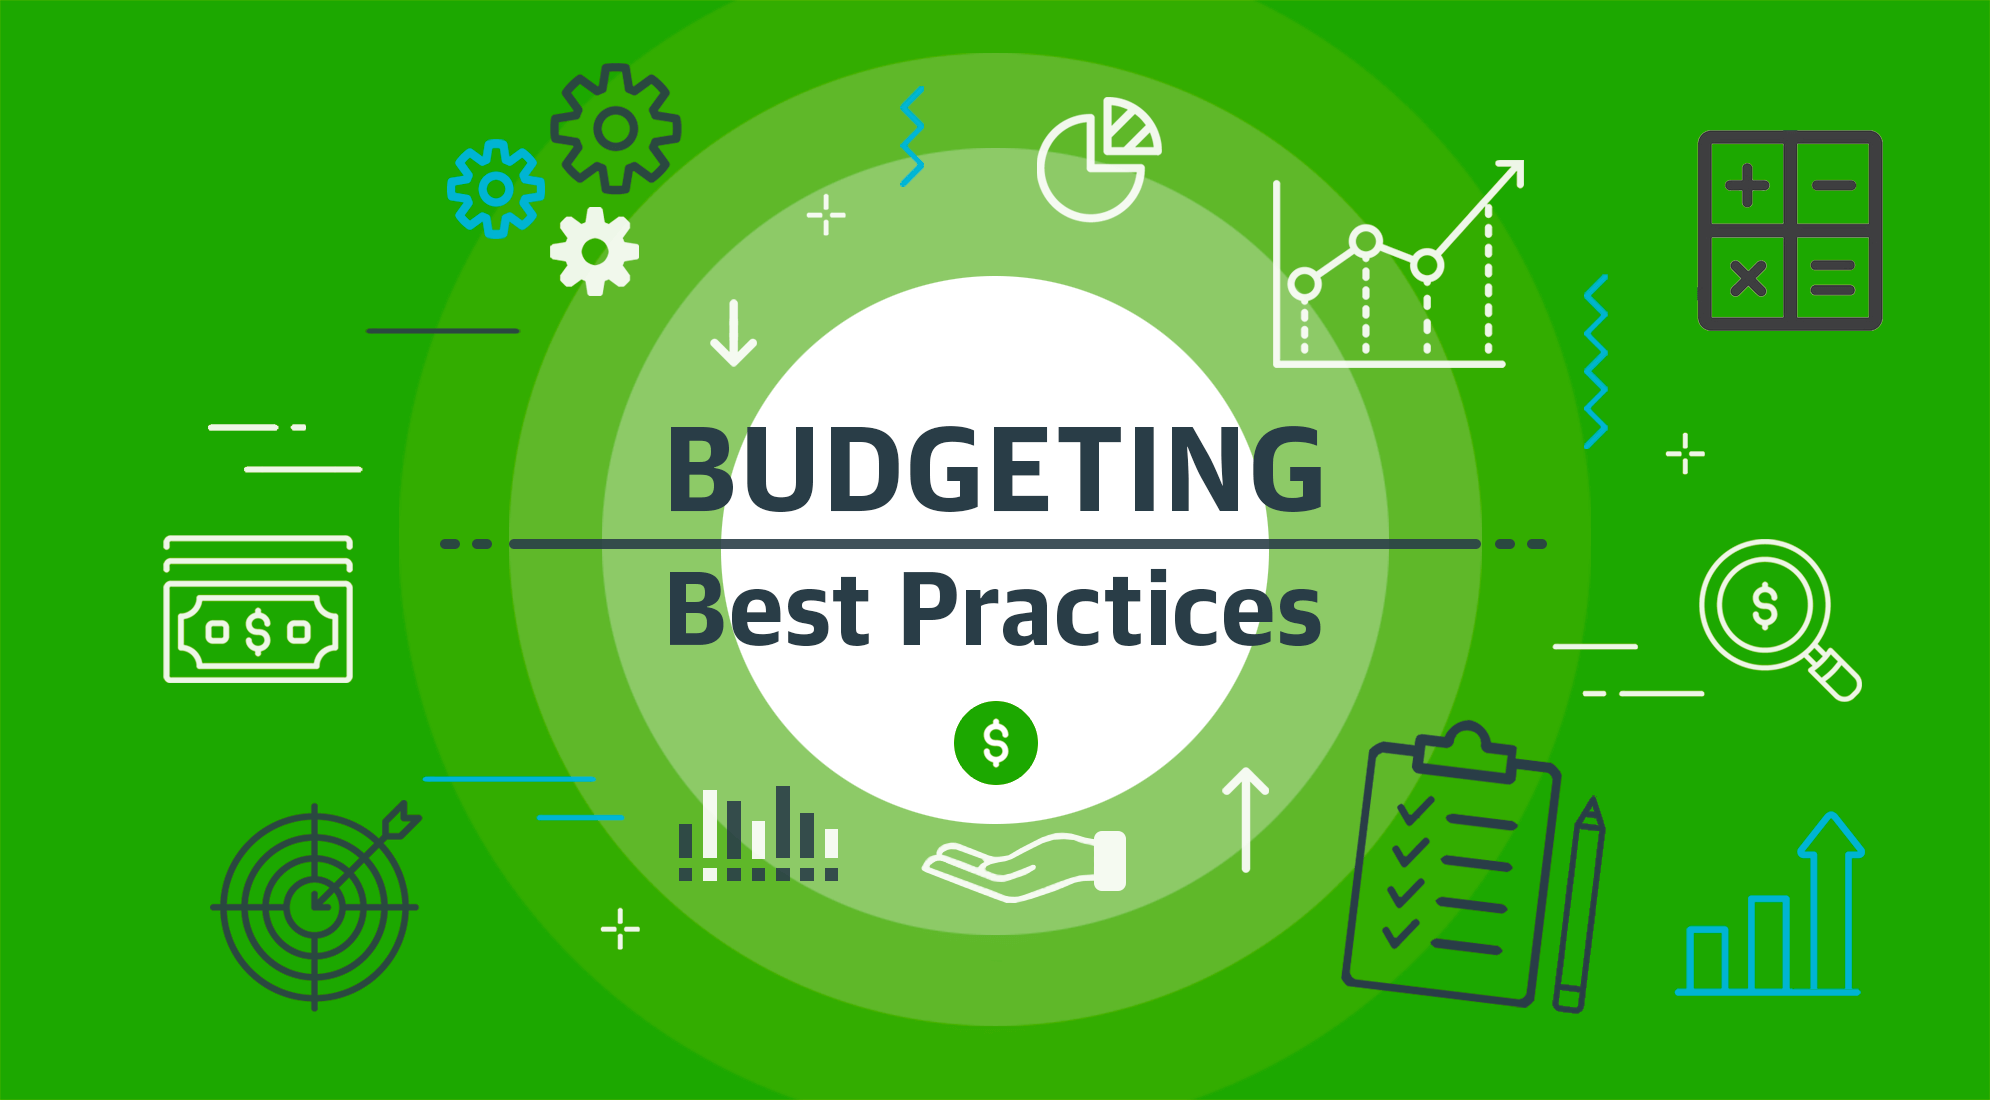 Construction Procurement Best Practices to Stay on Budget